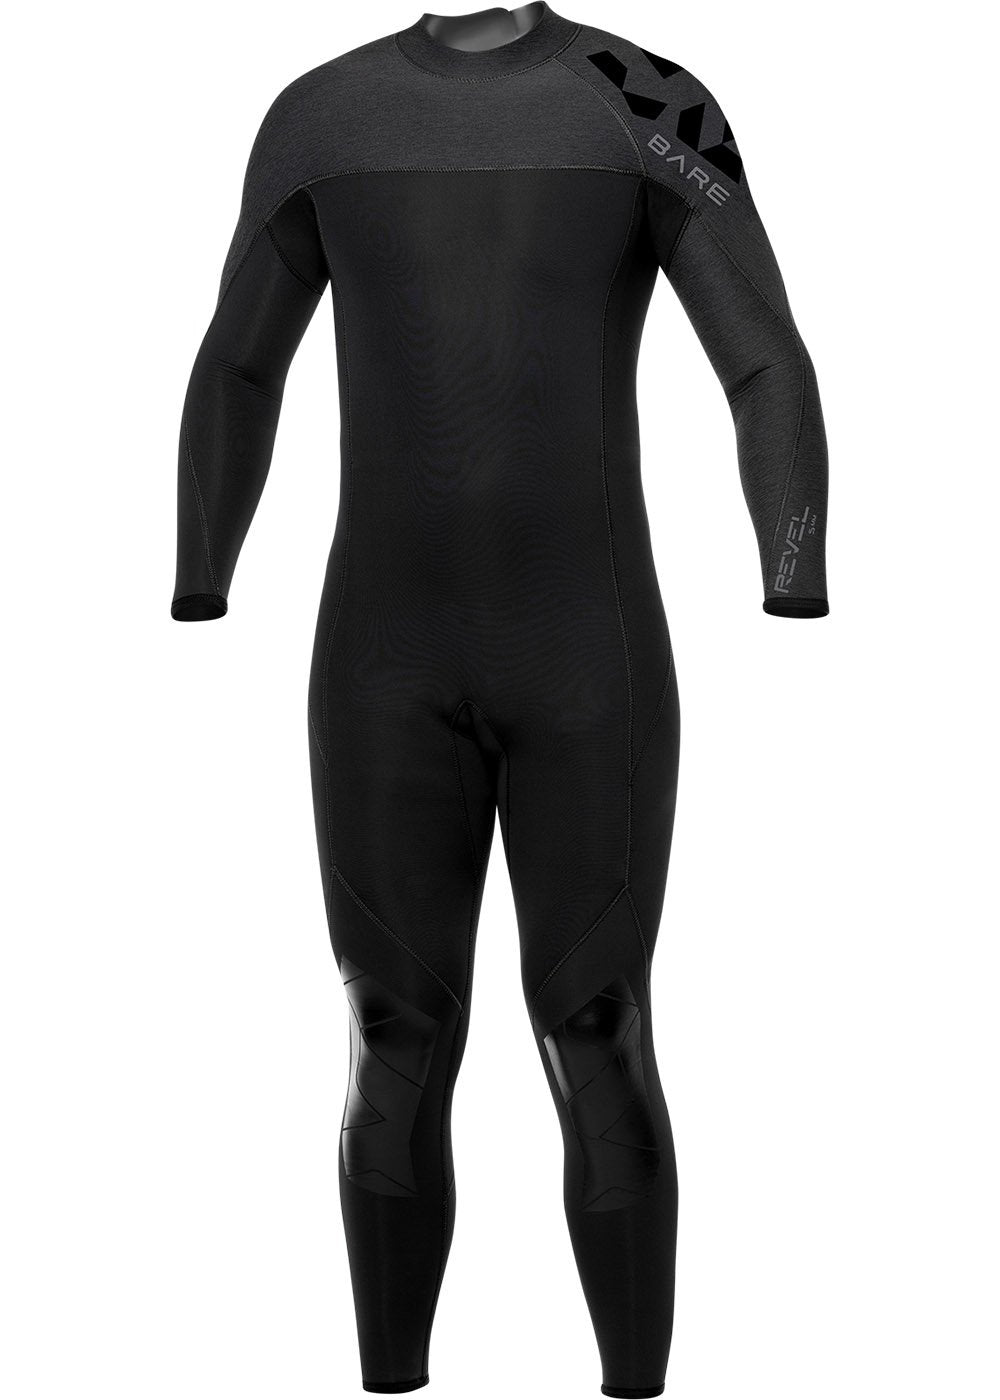 20% Off Almost All Scuba Diving Wetsuits Sale